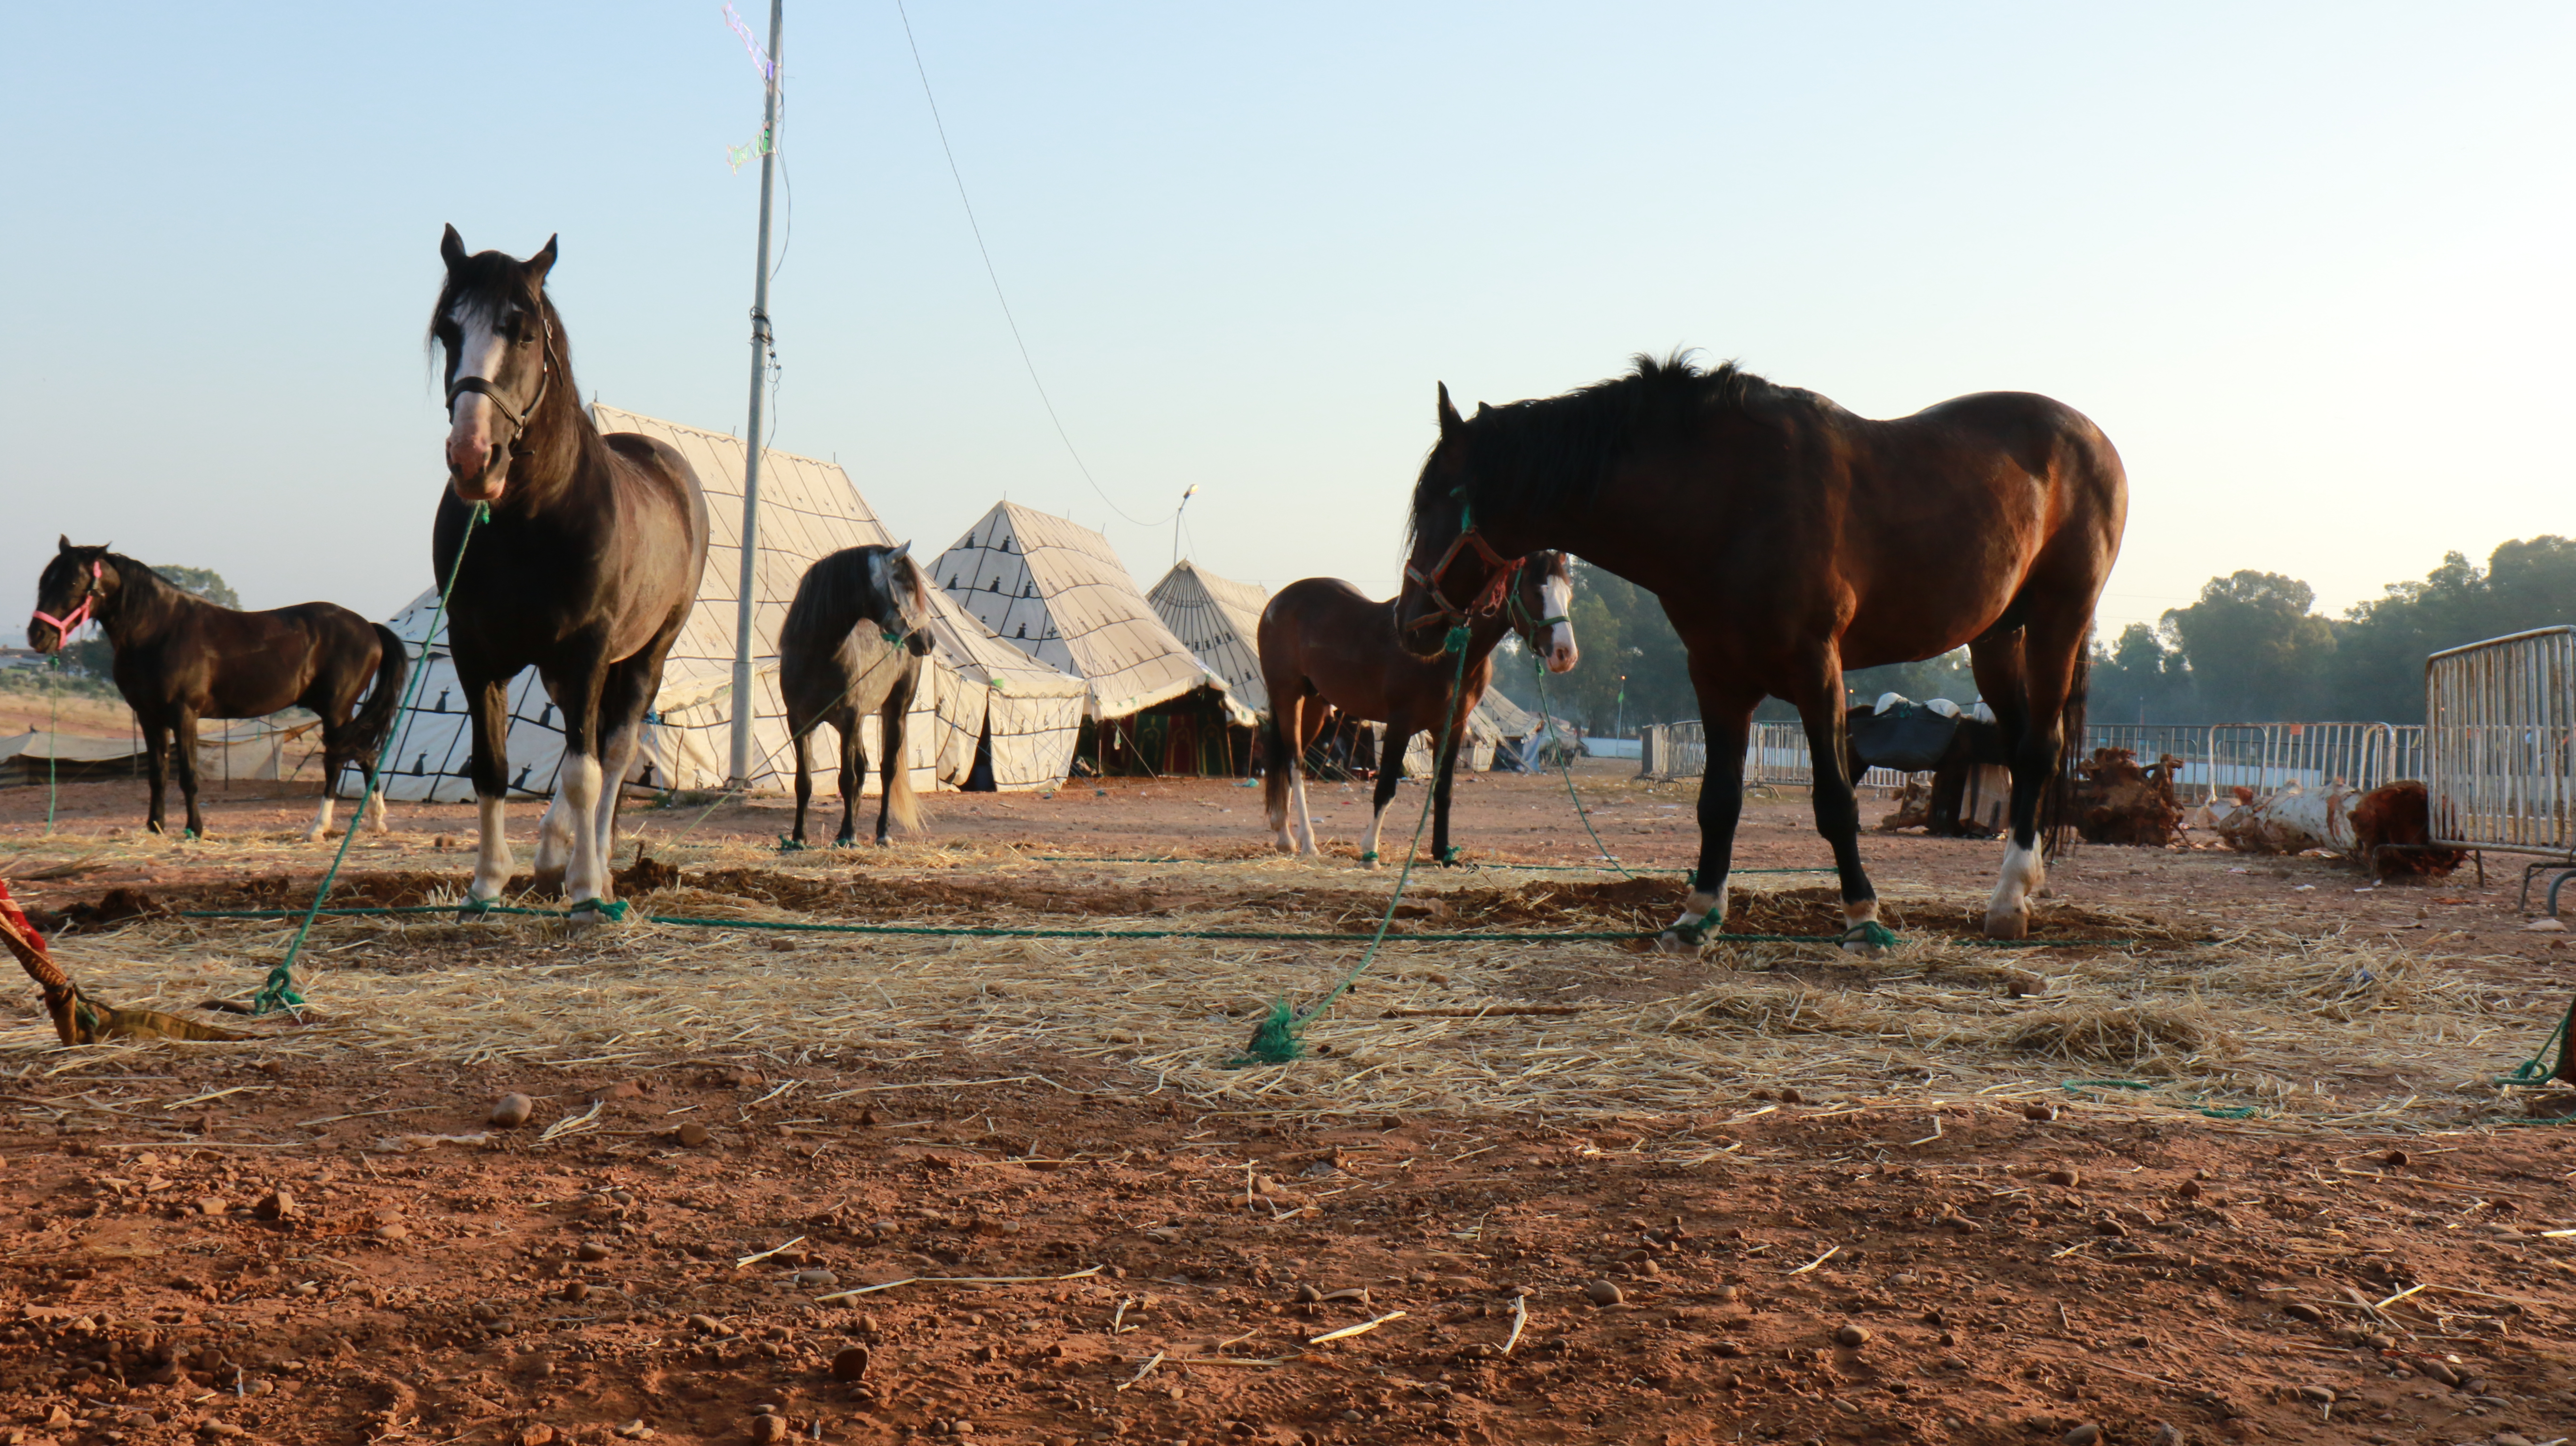 Horses graze in an arid field. A row of tents line the background.